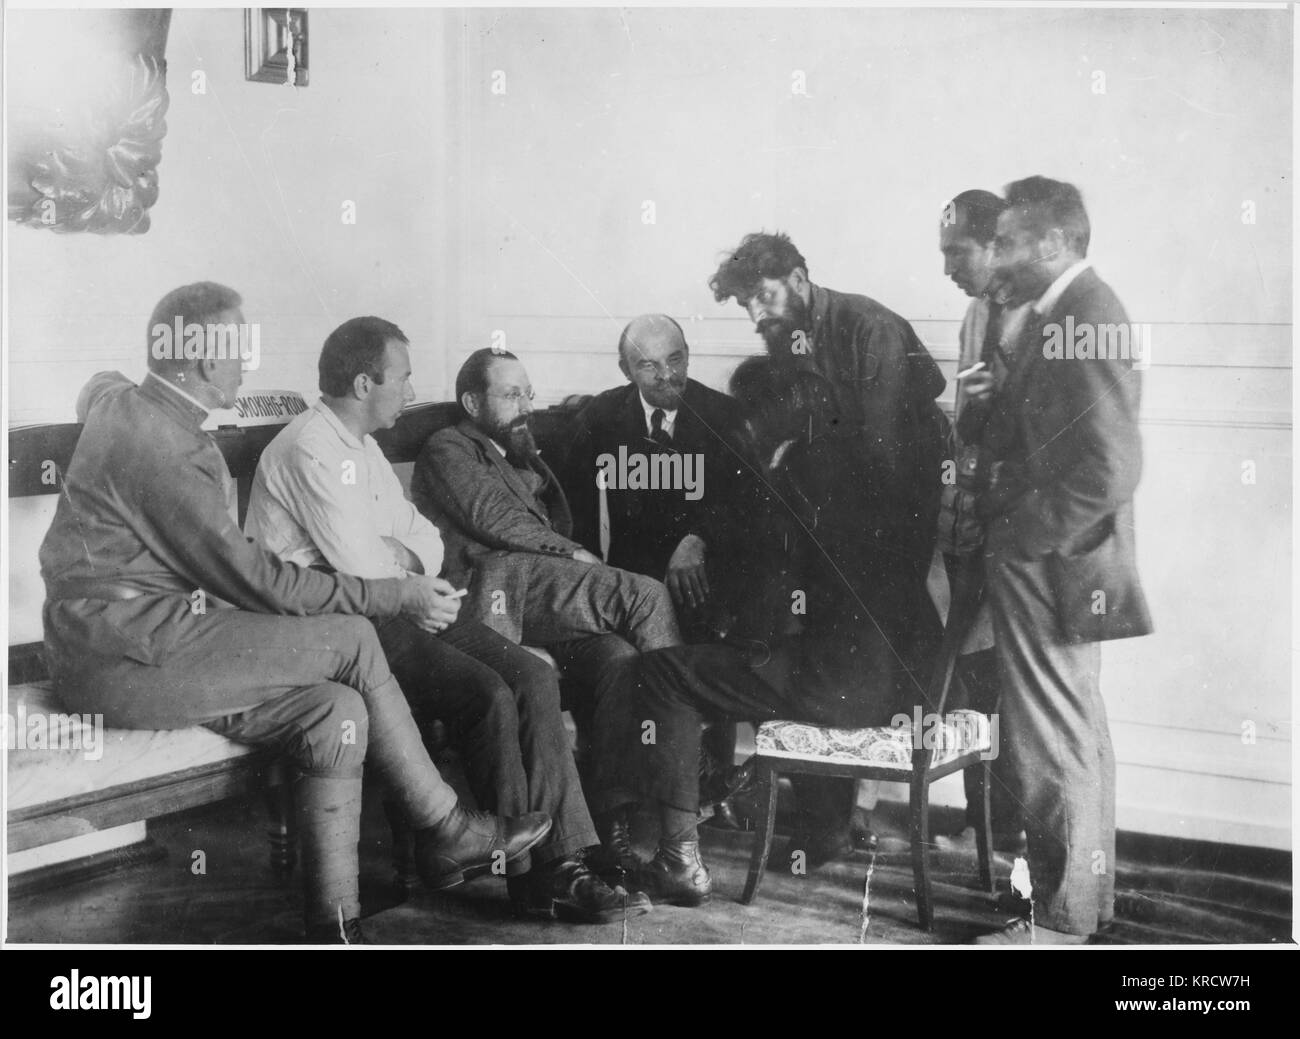 VLADIMIR LENIN Lenin in conversation with members of the 2nd congress of the Communist International (Comintern). Date: 1920 Stock Photo